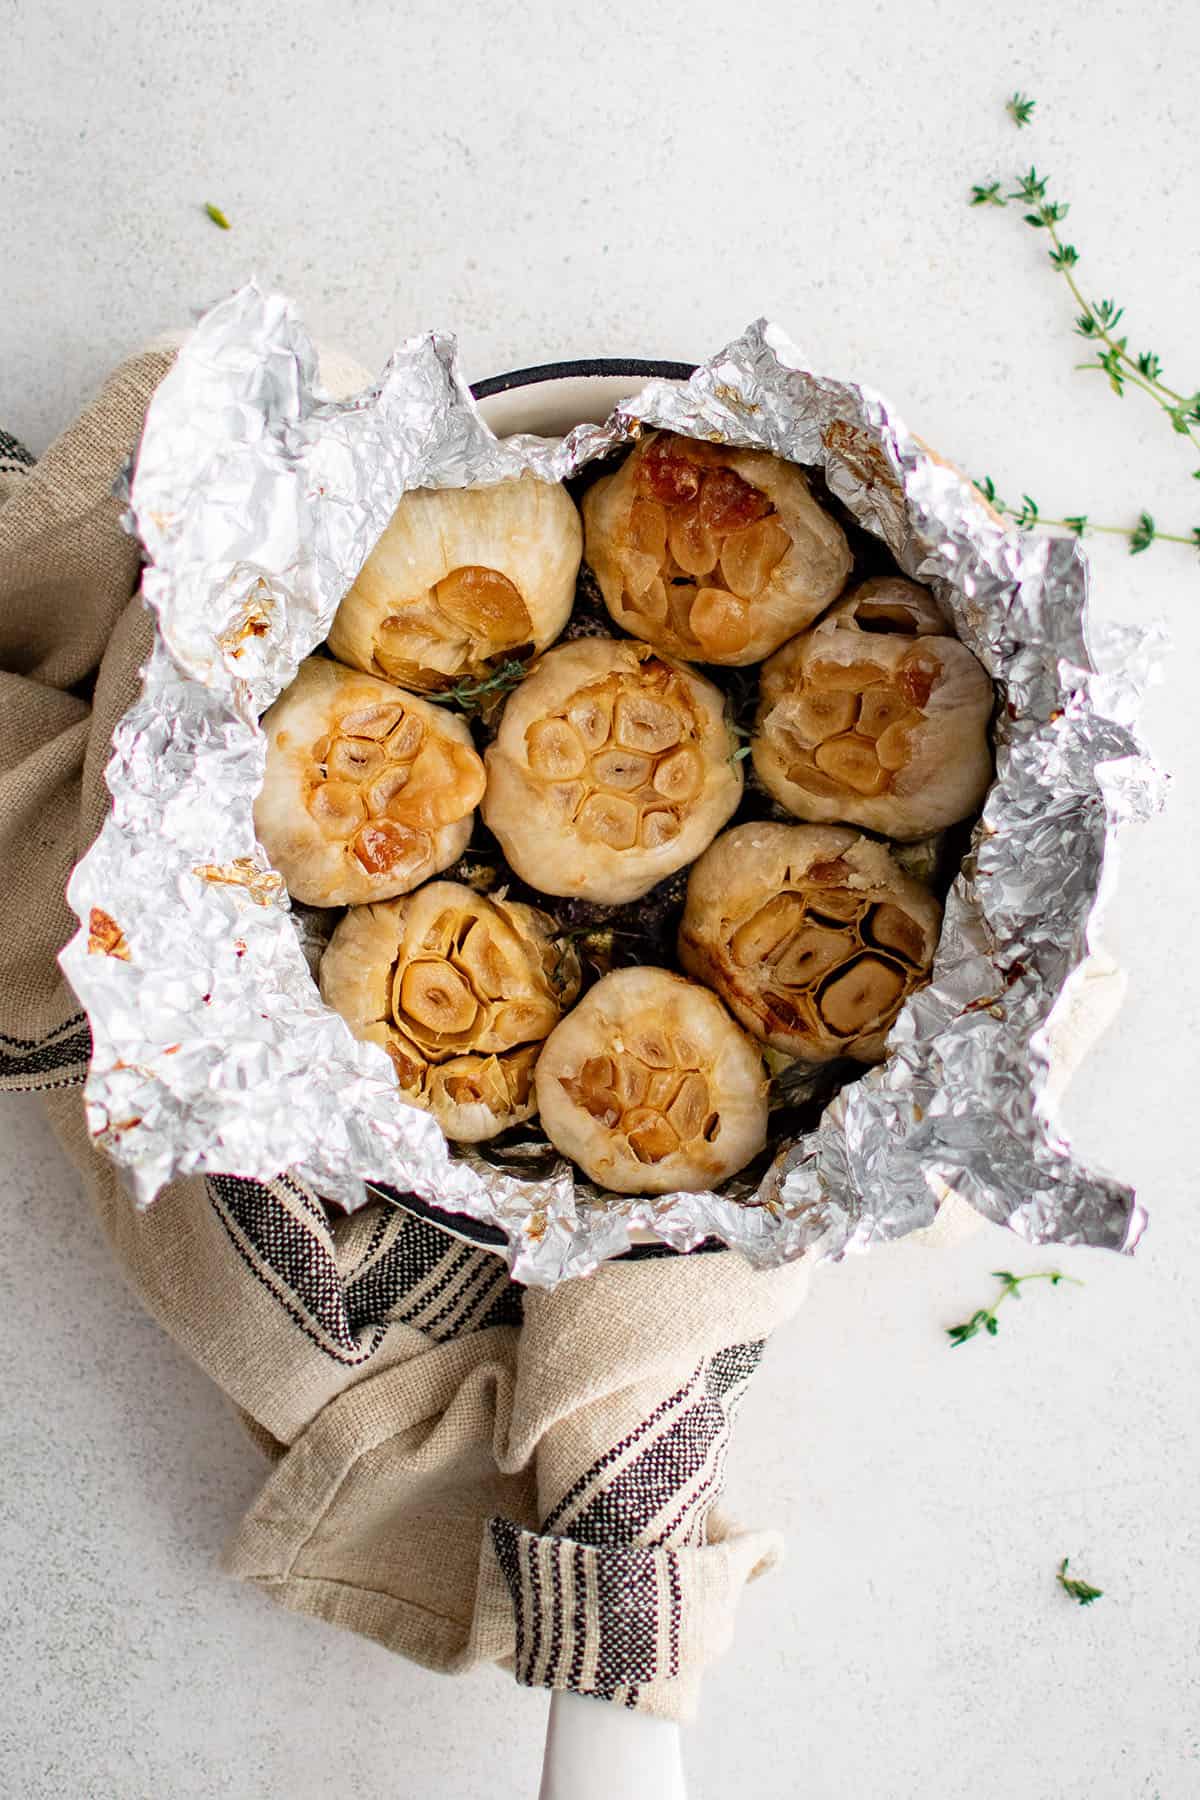 roasted heads of garlic in foil